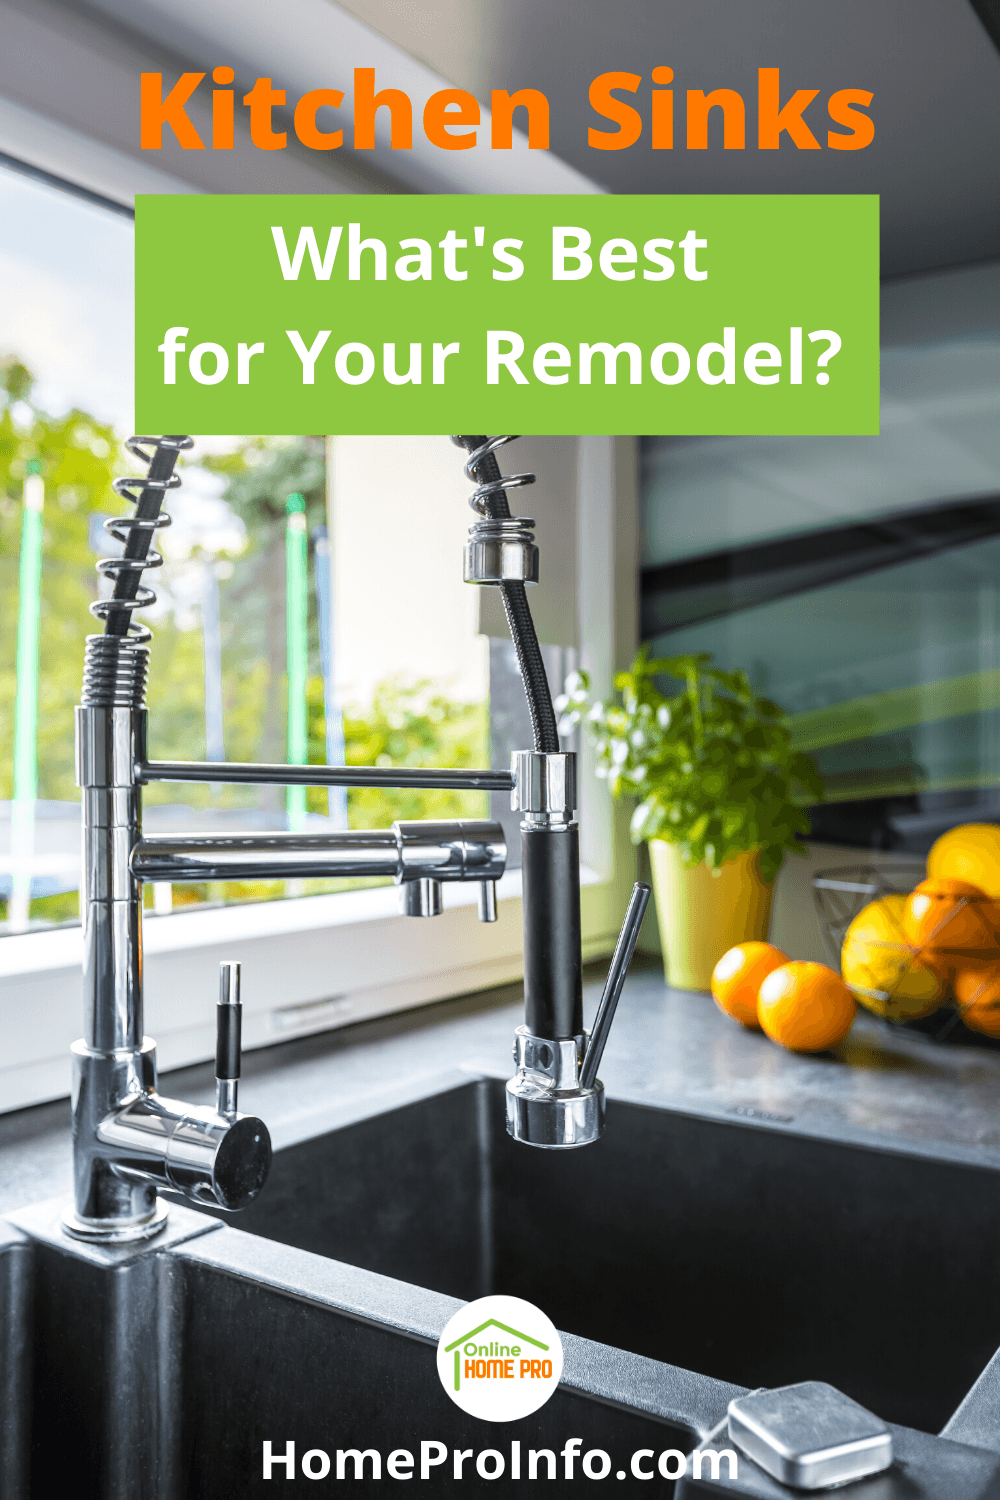 kitchen sinks and remodeling